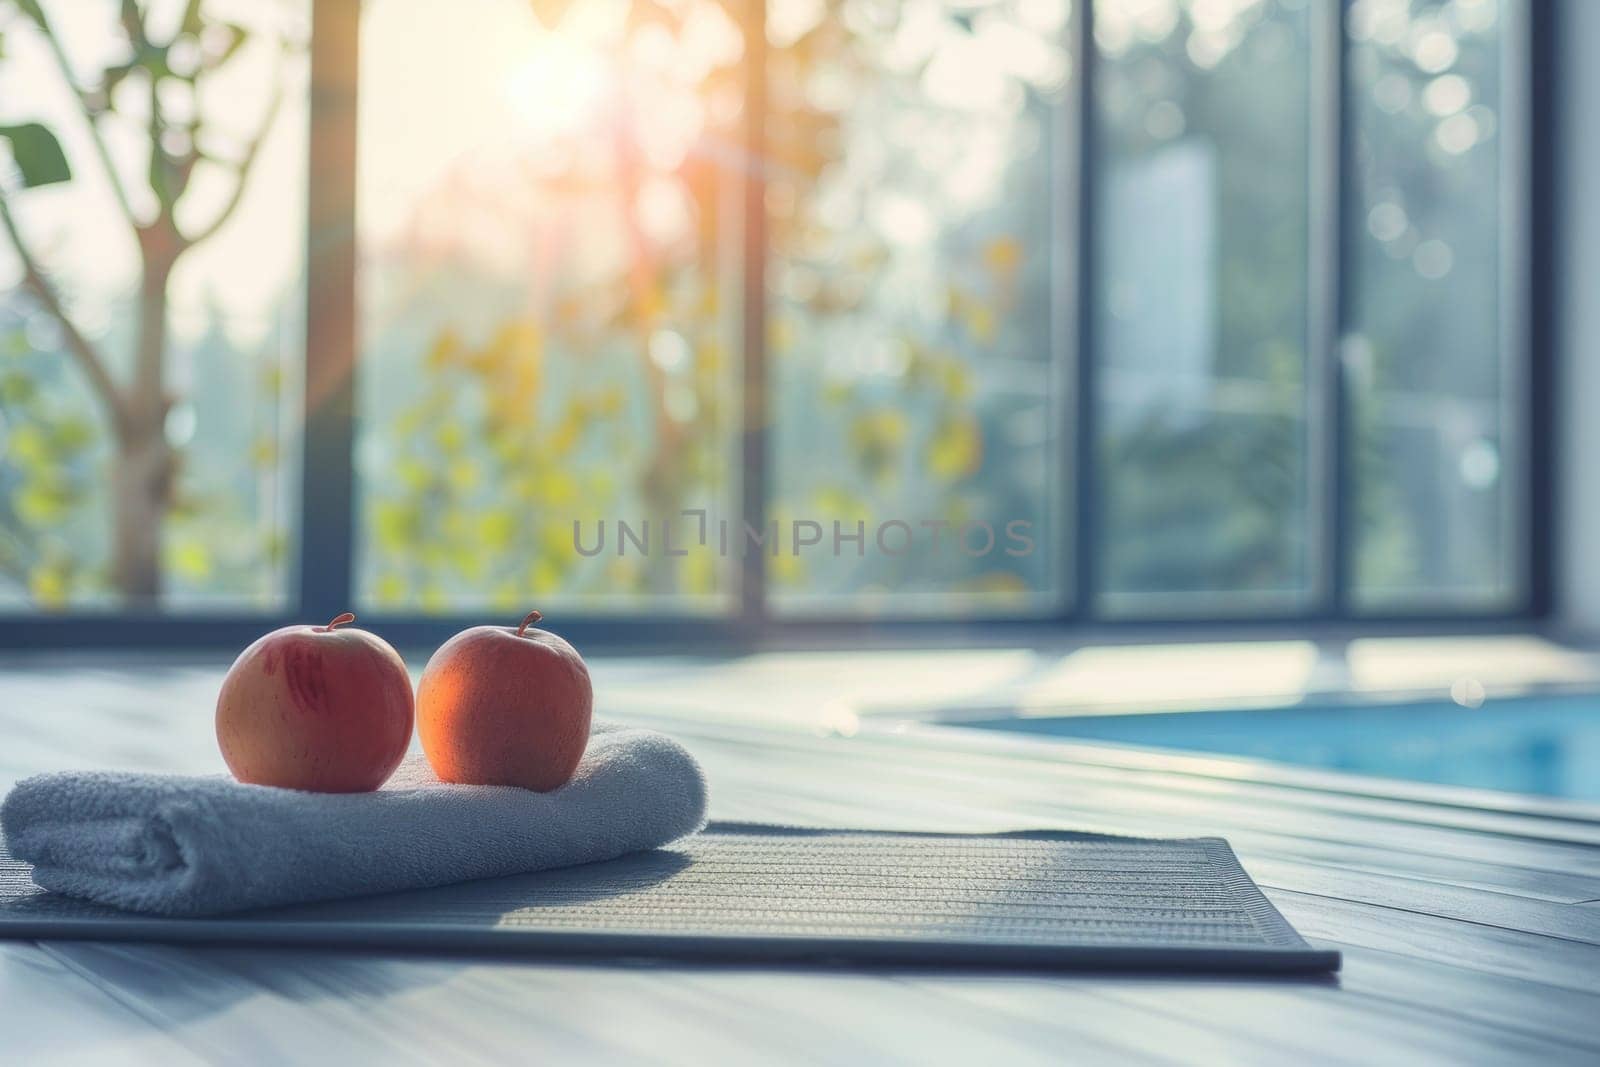 Lifestyle Wellness concept, a towel is on the ground next to two apples.